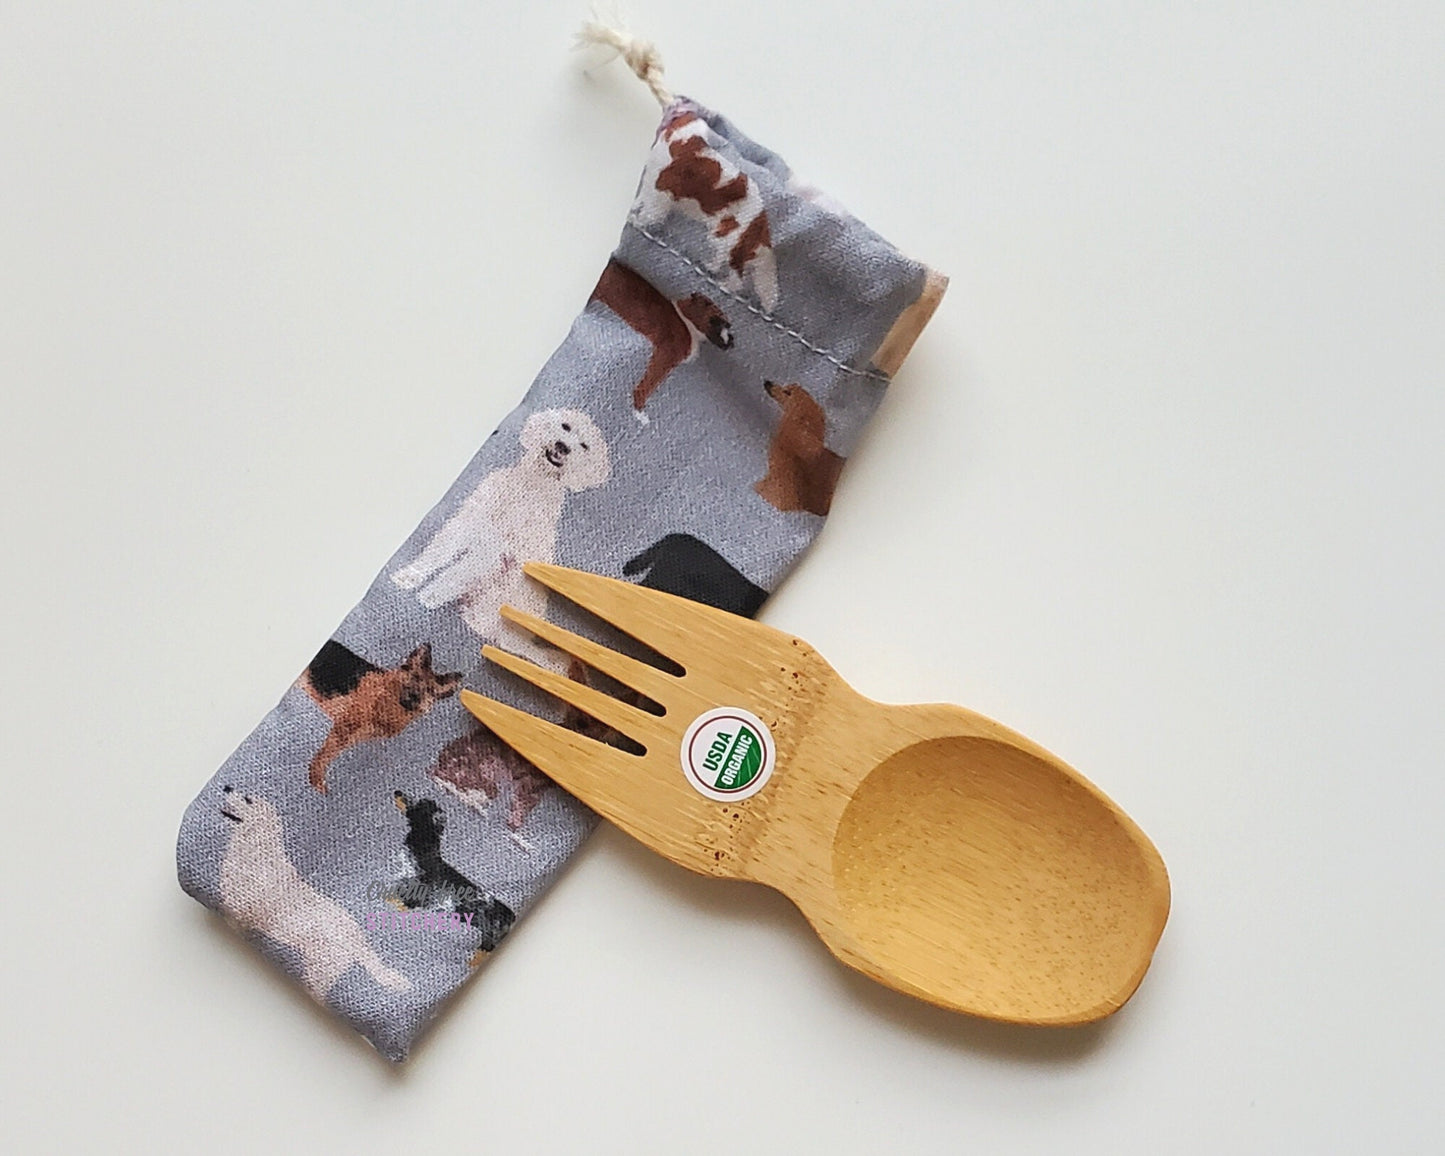 Grey with dogs print reusable spork pouch. The pouch is sitting diagonally with the spork partially on top pointing the other way. The fork end of the spork is pointing to the left.